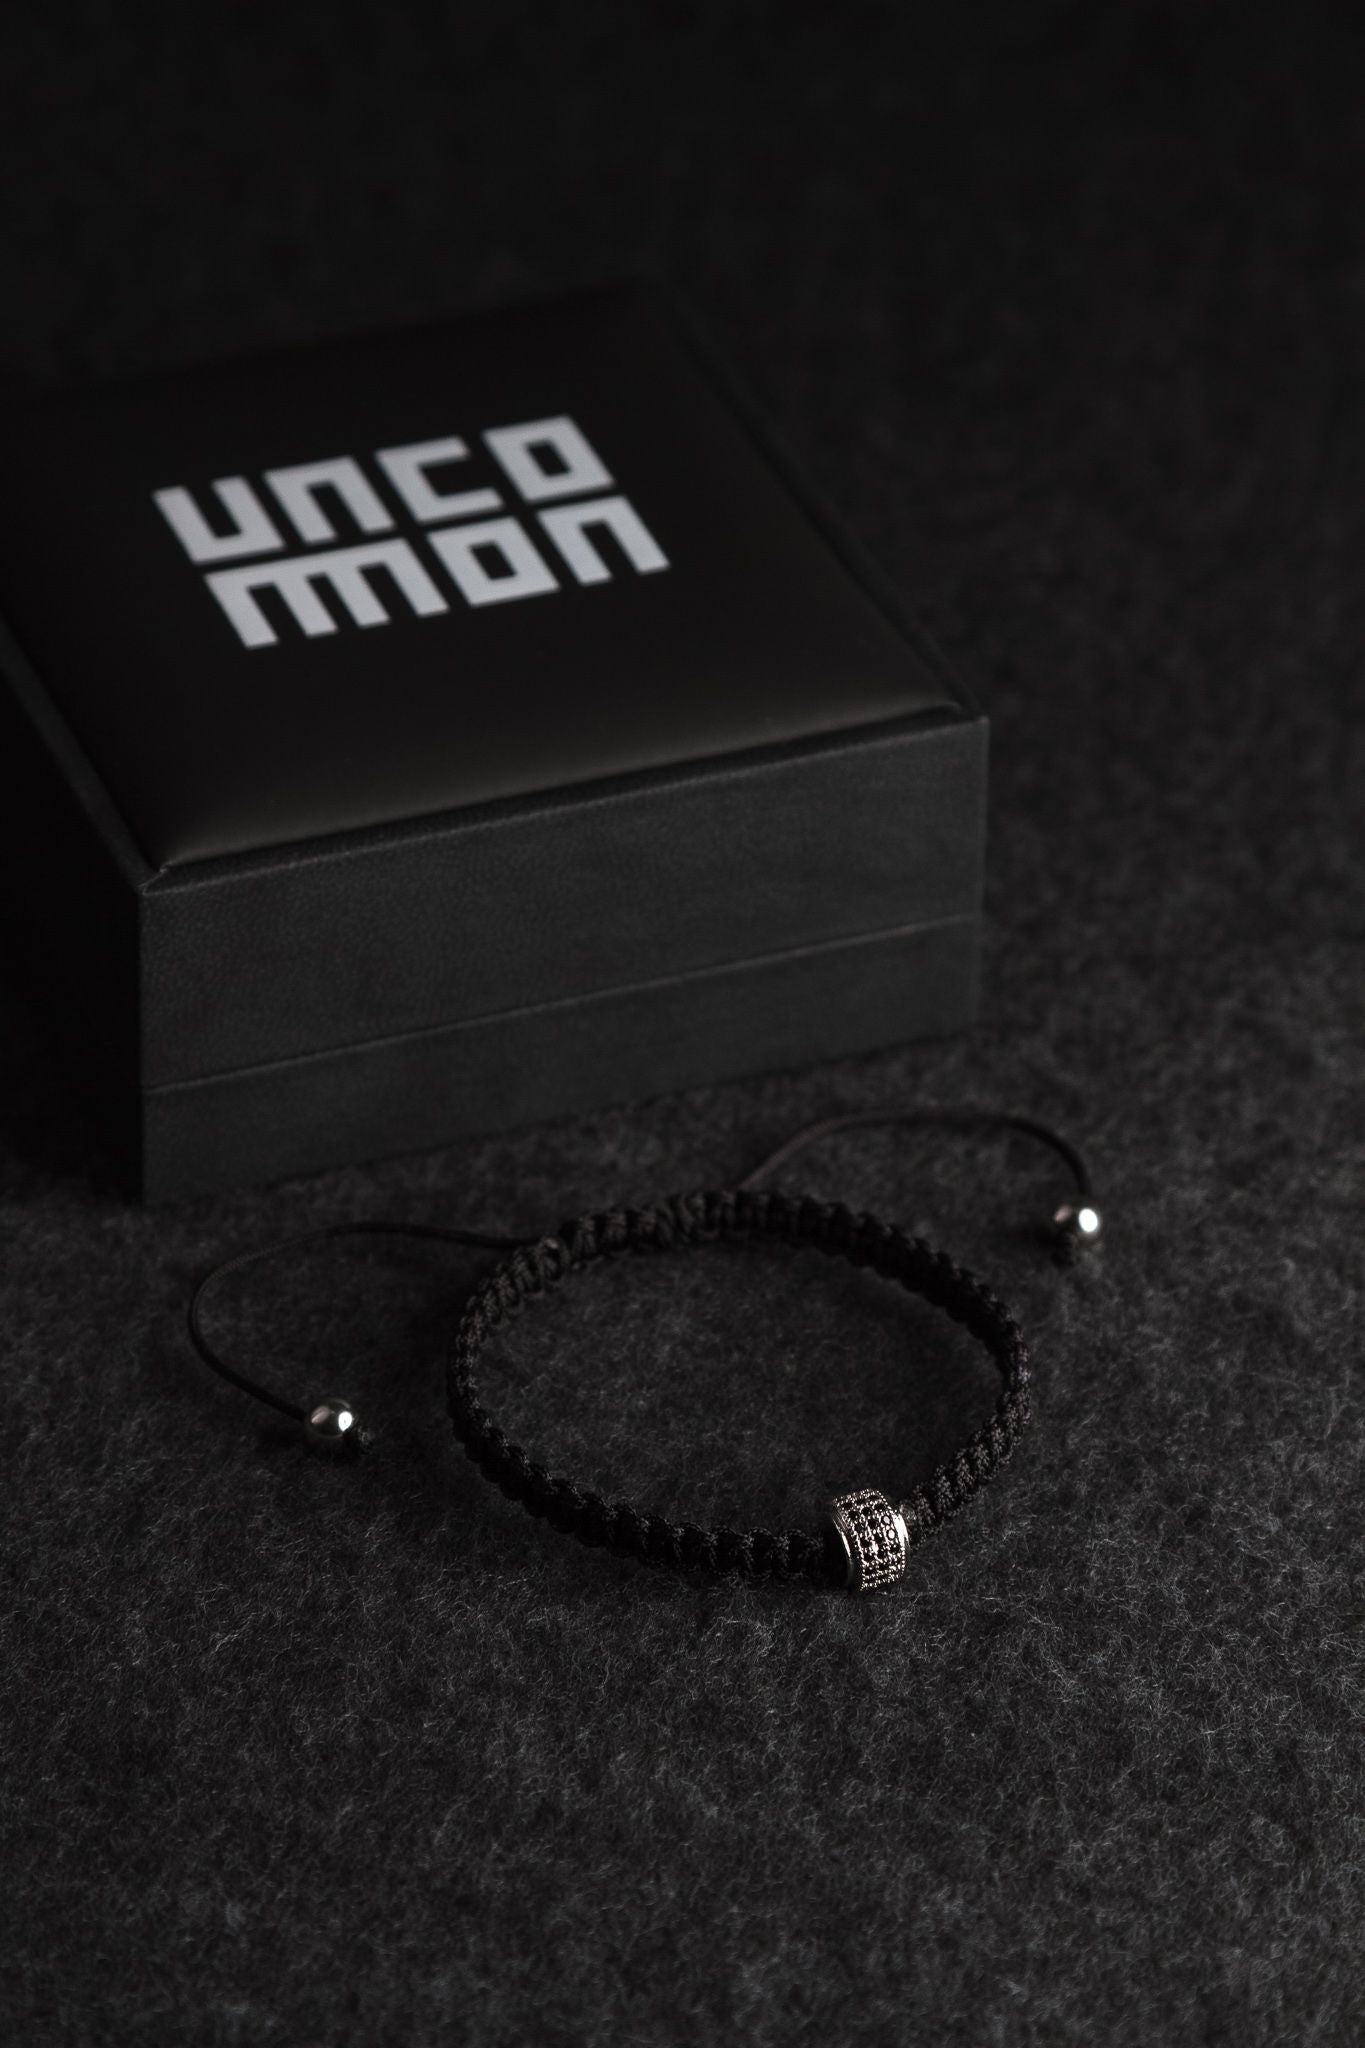 UNCOMMON Men's Woven Bracelet with Single Silver Charm and Accent Beads